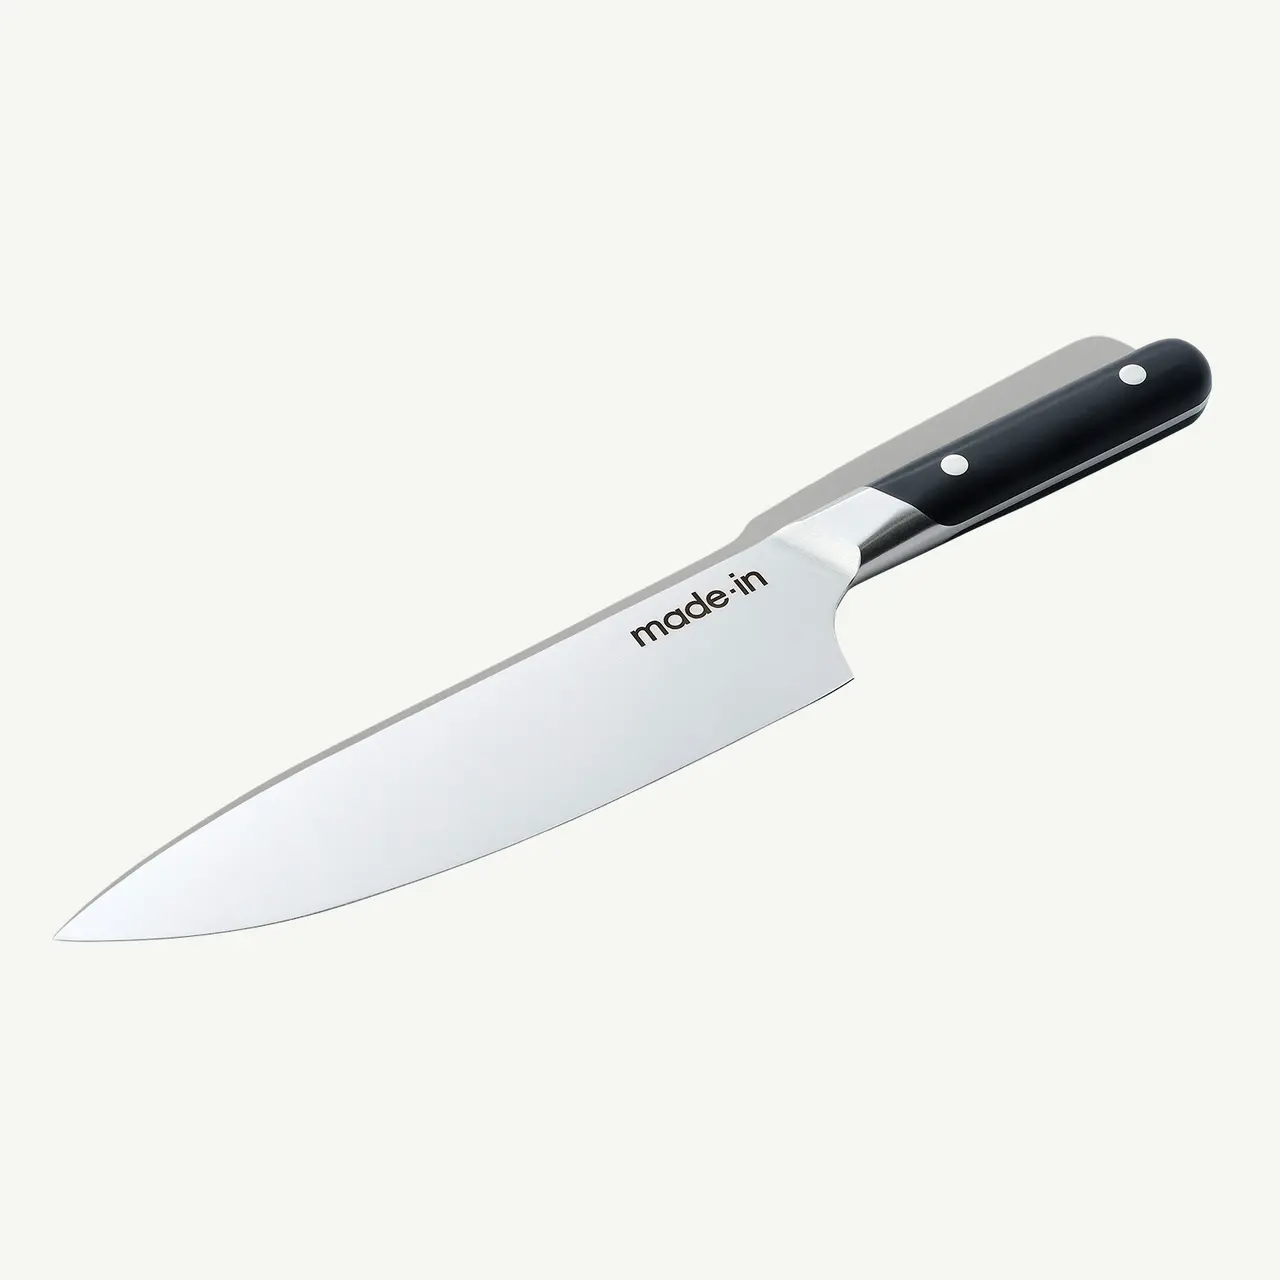 A chef's knife with a black handle and "made in" text on the blade is displayed against a white background.